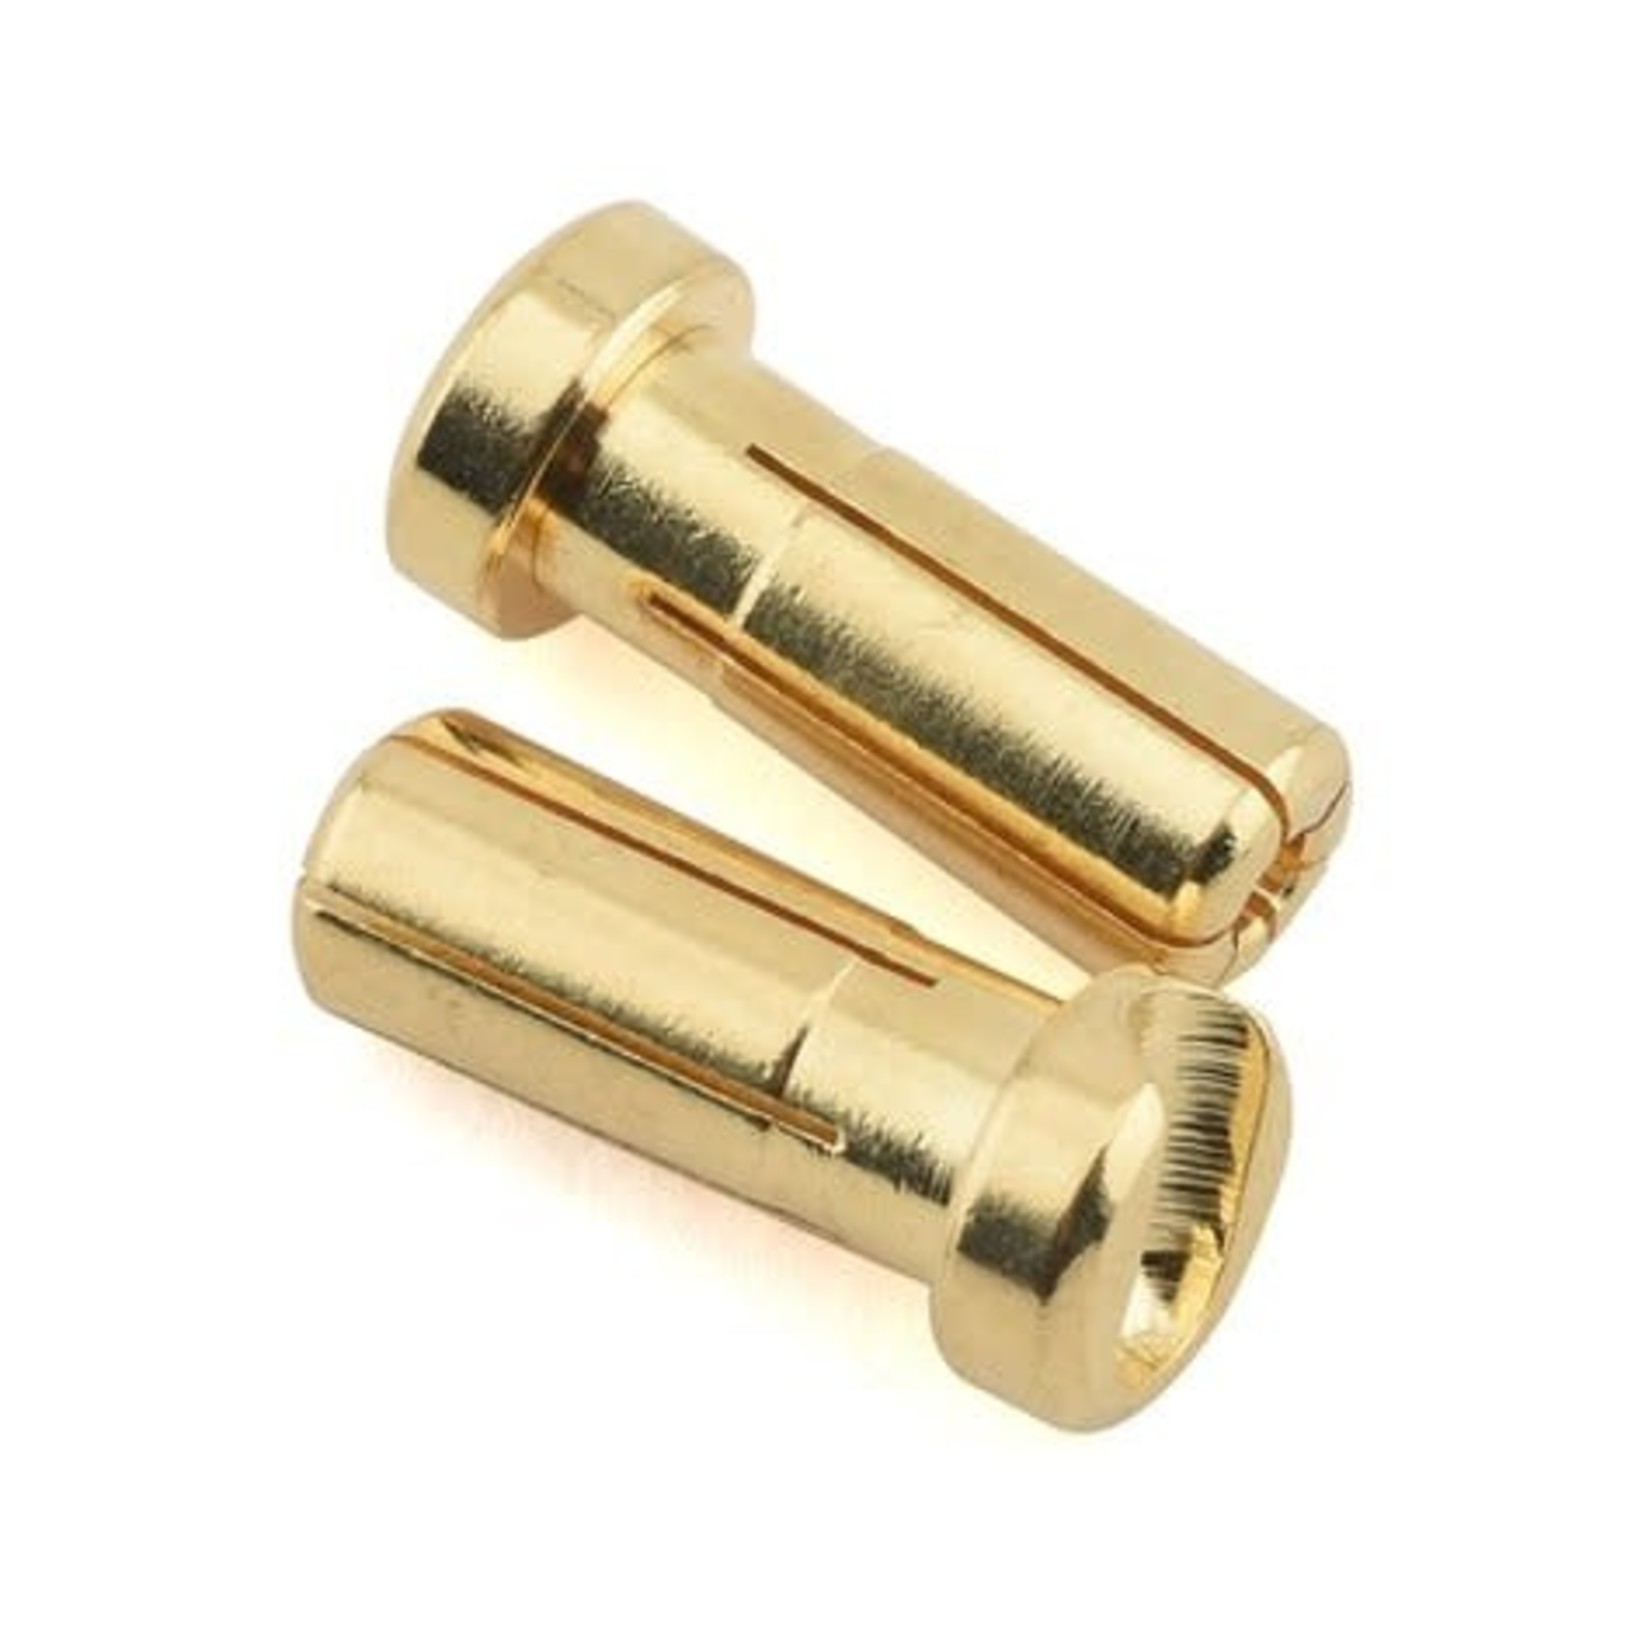 1UP 1UP Racing 5mm LowPro Bullet Plugs (2)